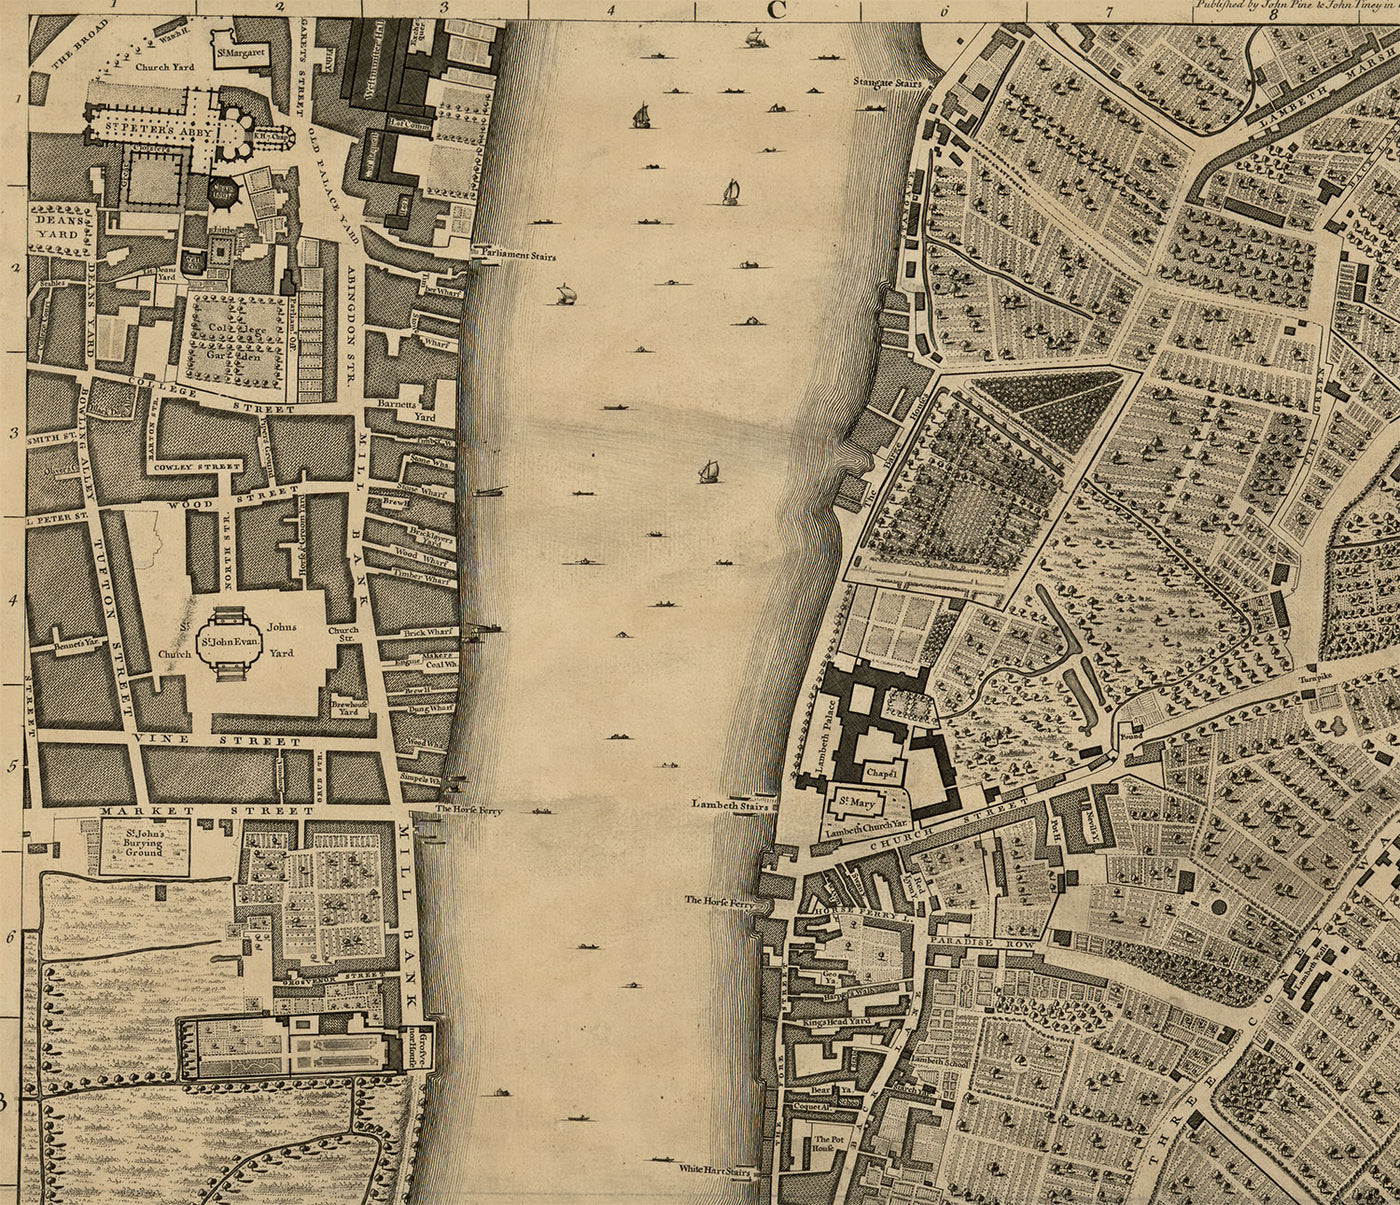 Complete Large Map of London in 1746 by John Rocque